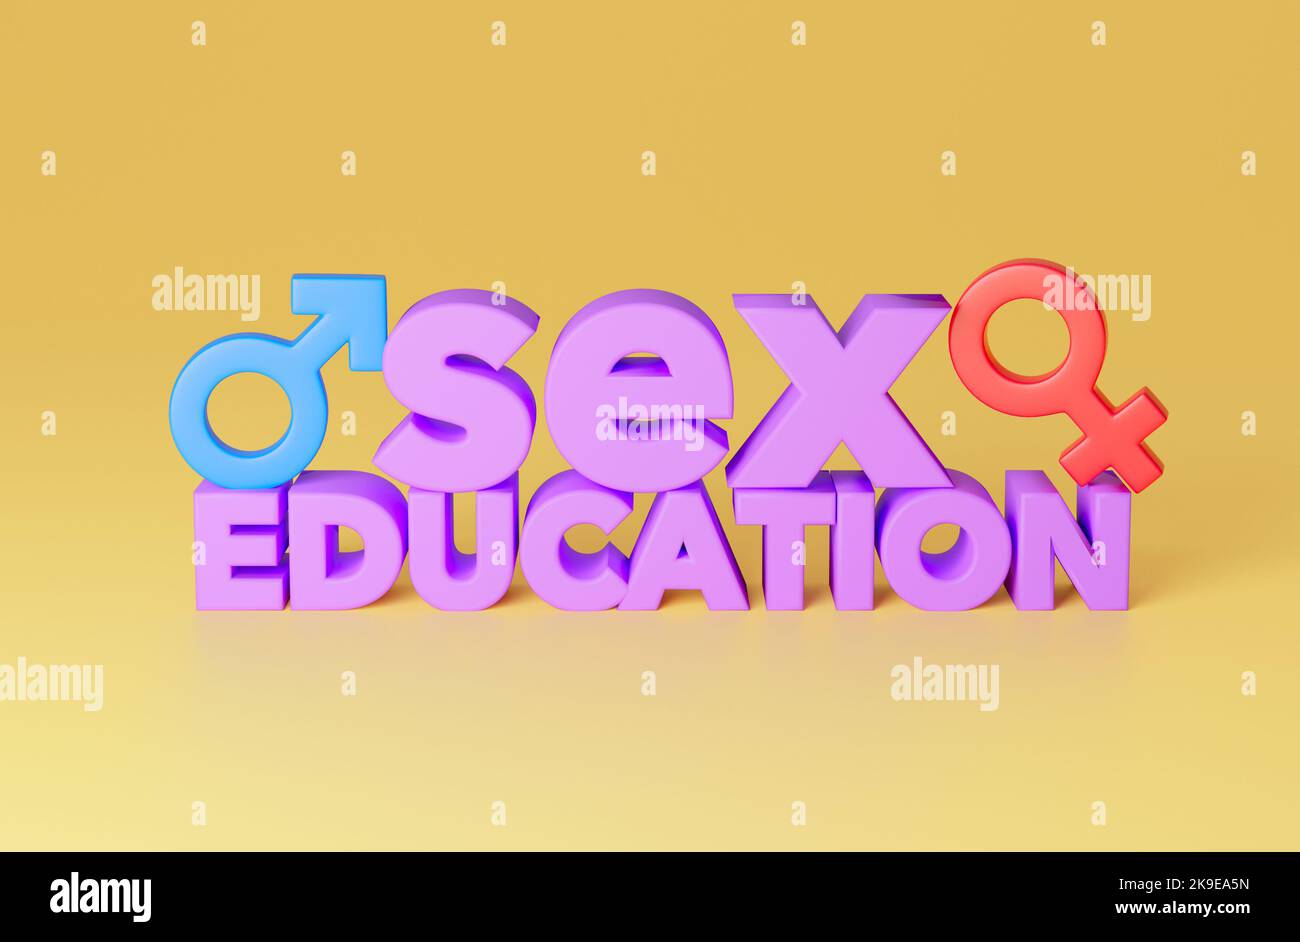 Sex education. Purple lettering on a yellow background with gender symbols of man and woman. 3d render. Stock Photo